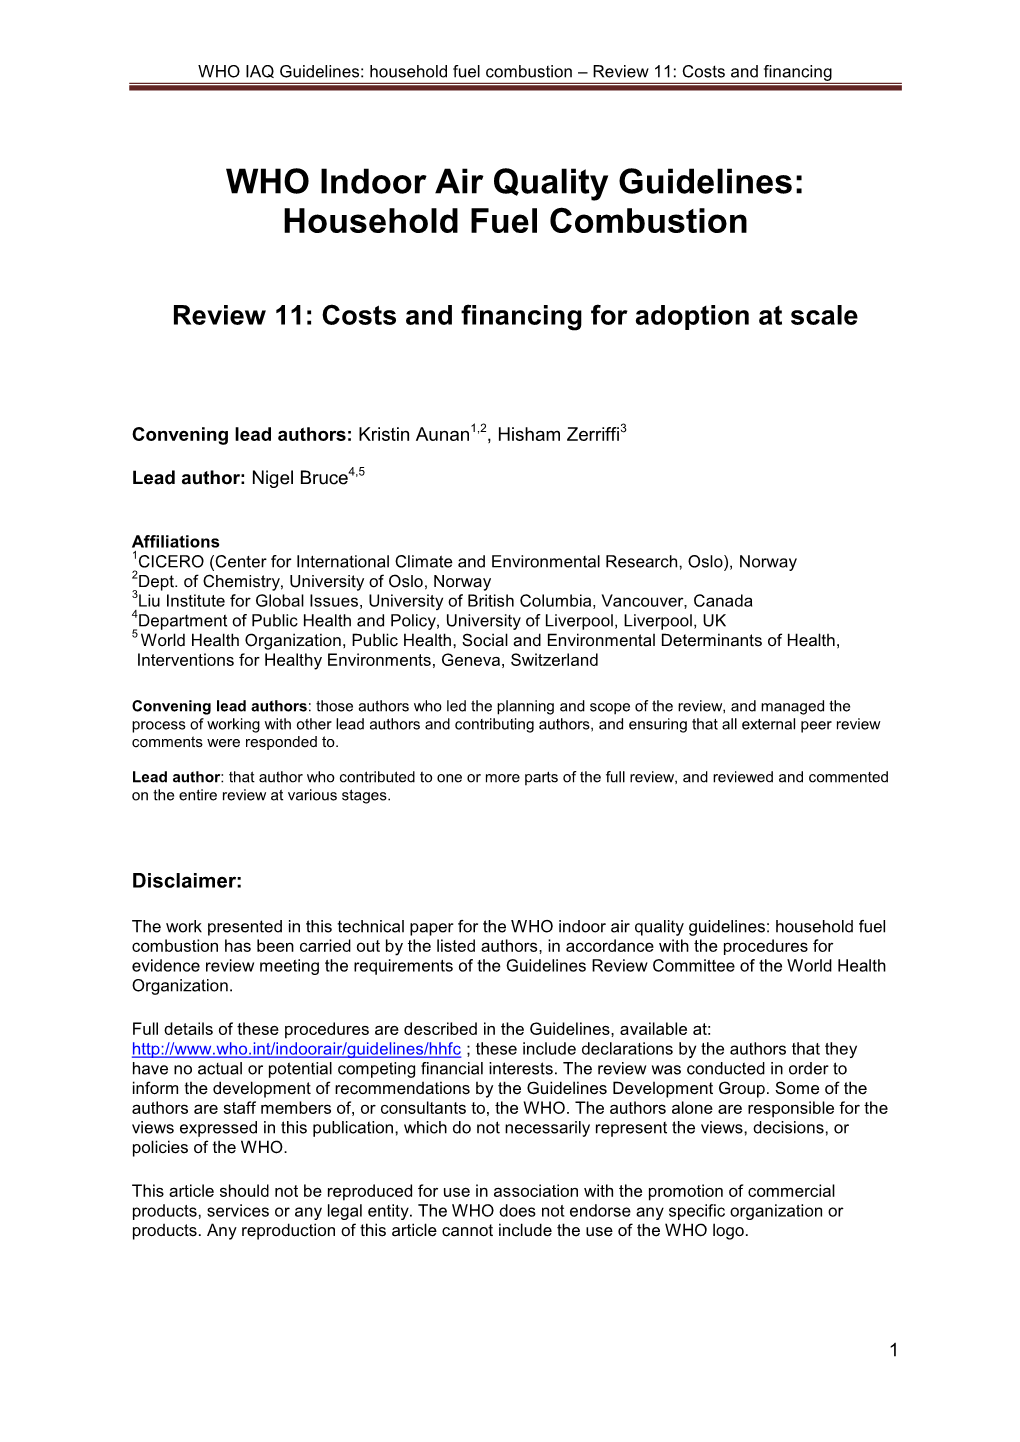 WHO IAQ Guidelines: Household Fuel Combustion – Review 11: Costs and Financing